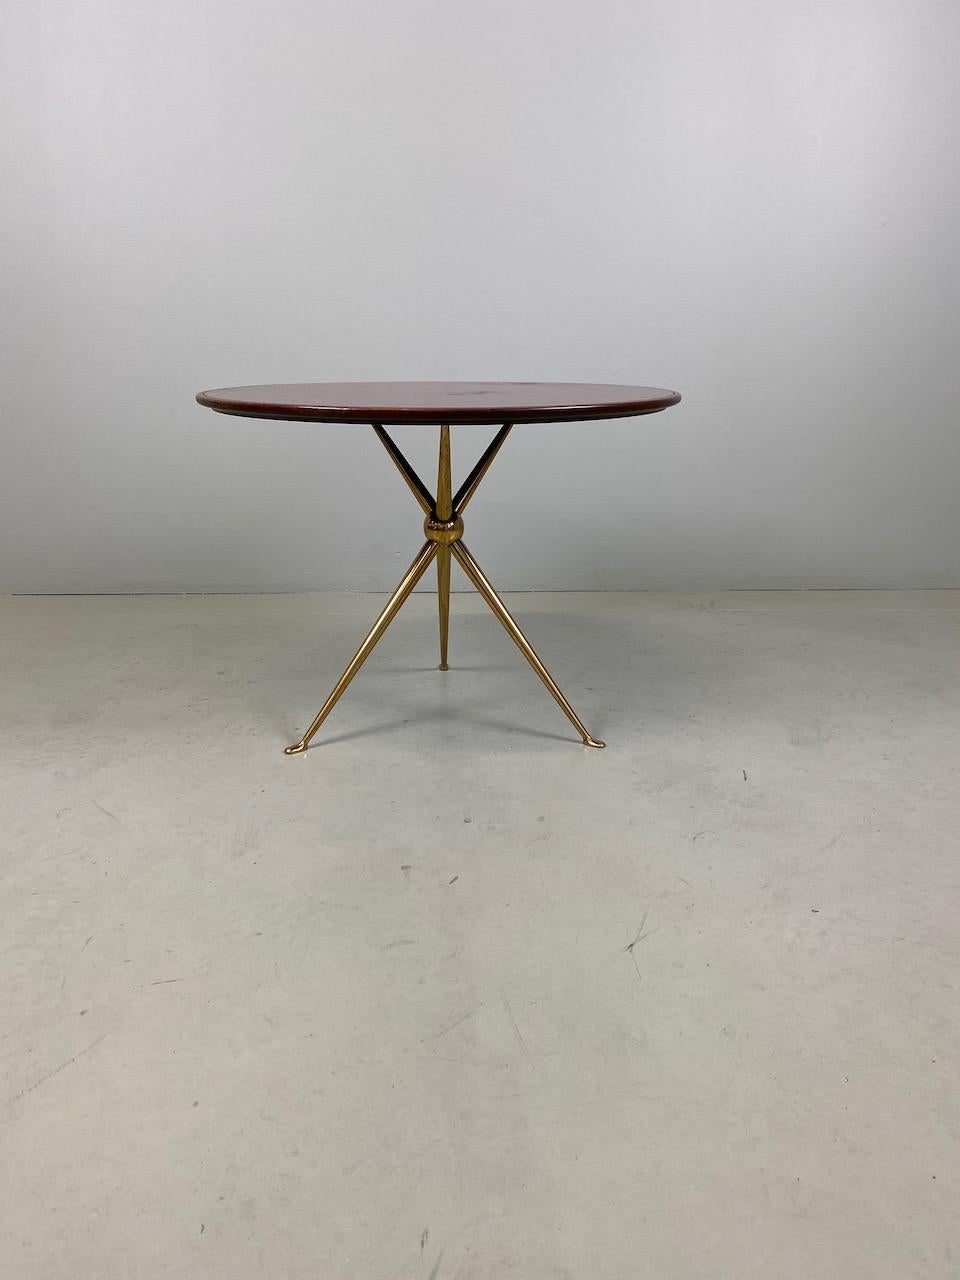 Rare side table with wood top and original inset reverse painted deep red glass gilt brass tripod base, designed by Osvaldo Borsani and manufactured by Arredamenti Borsani Varedo, Milano.